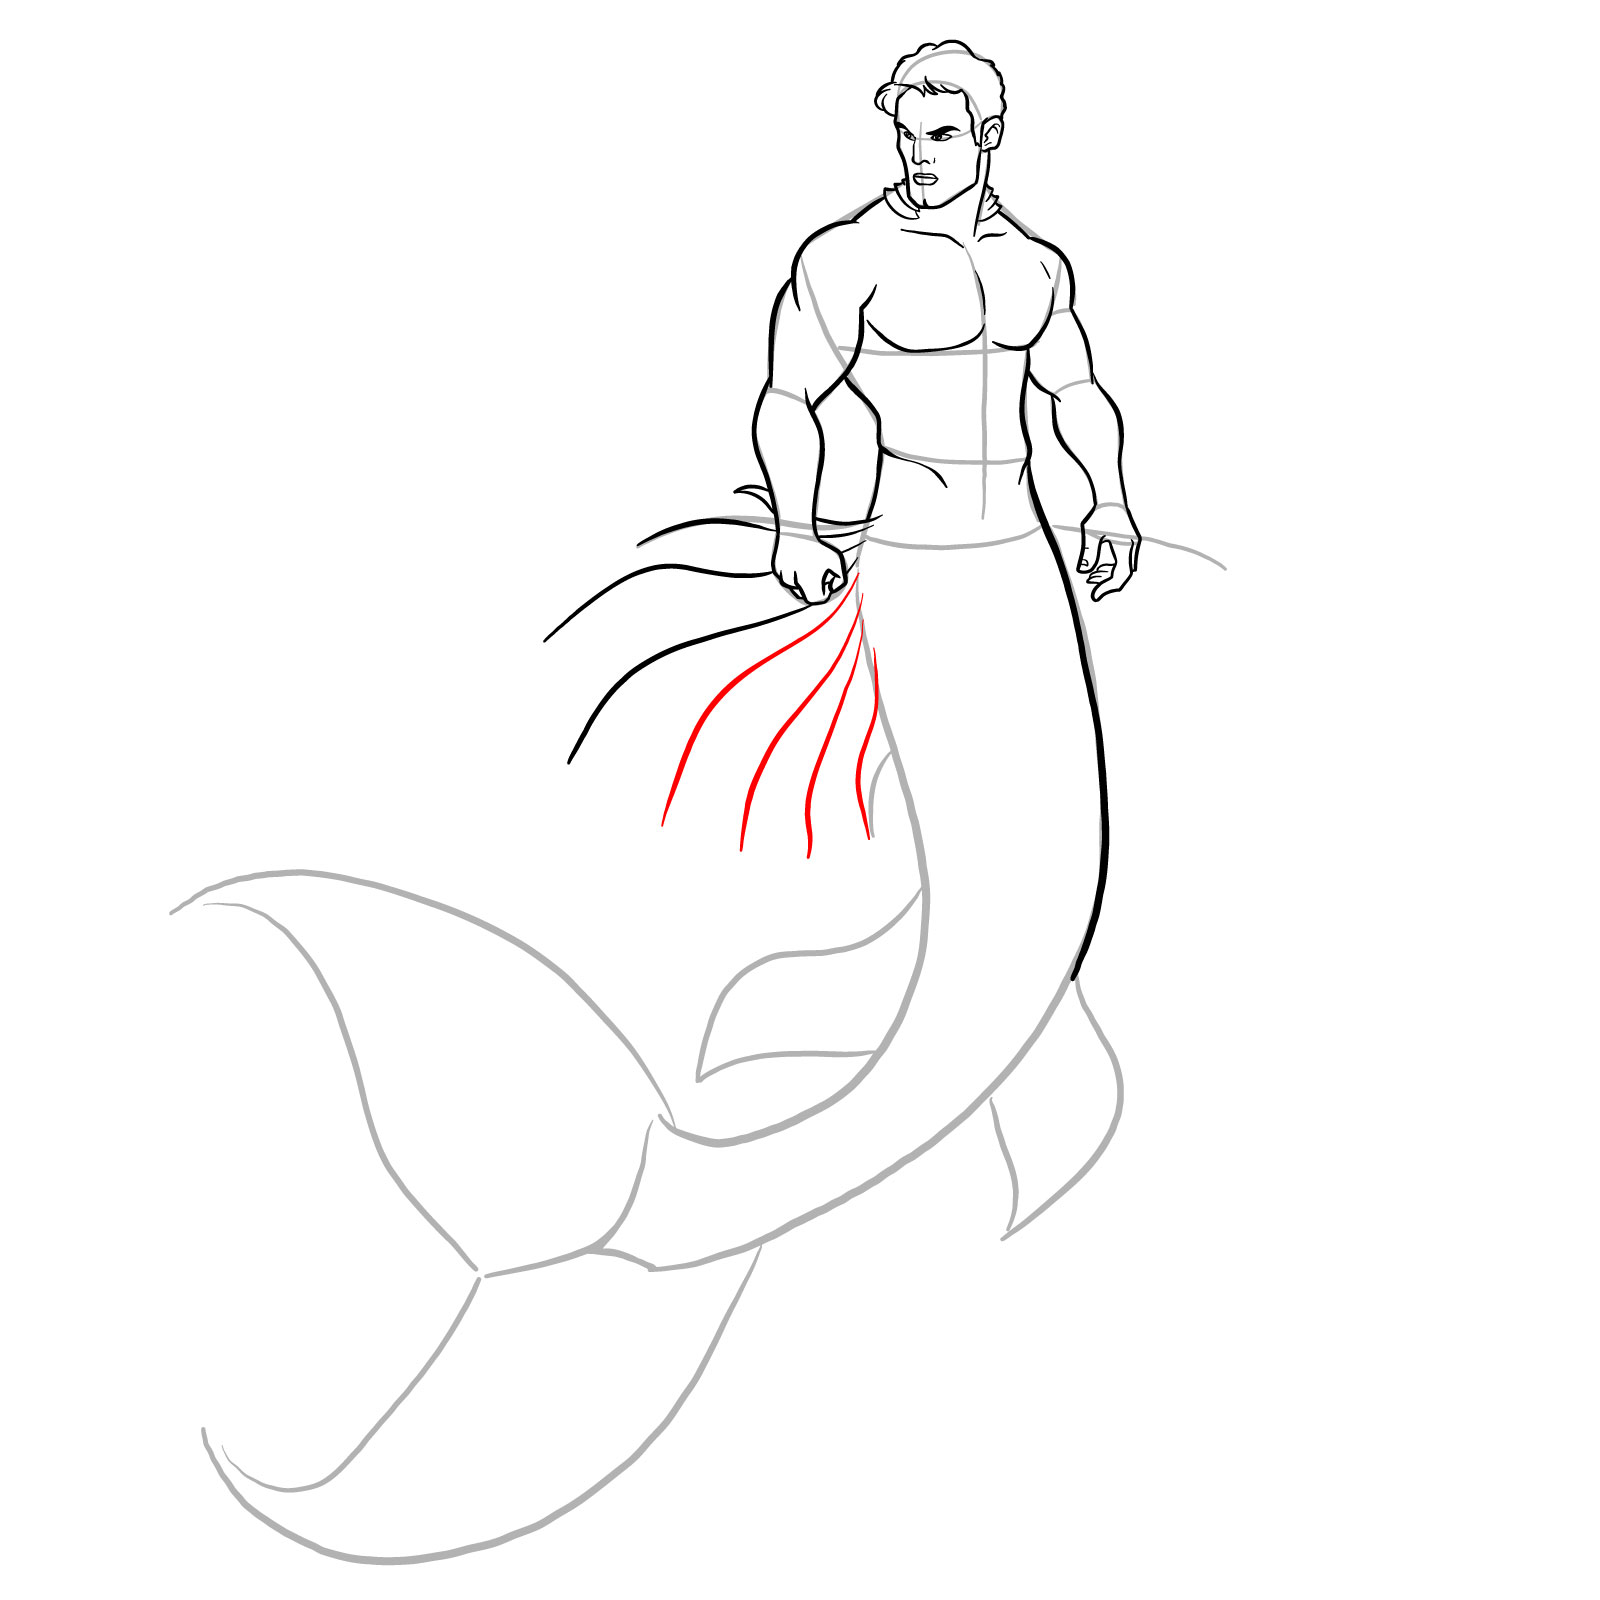 How to draw a Merman - step 25